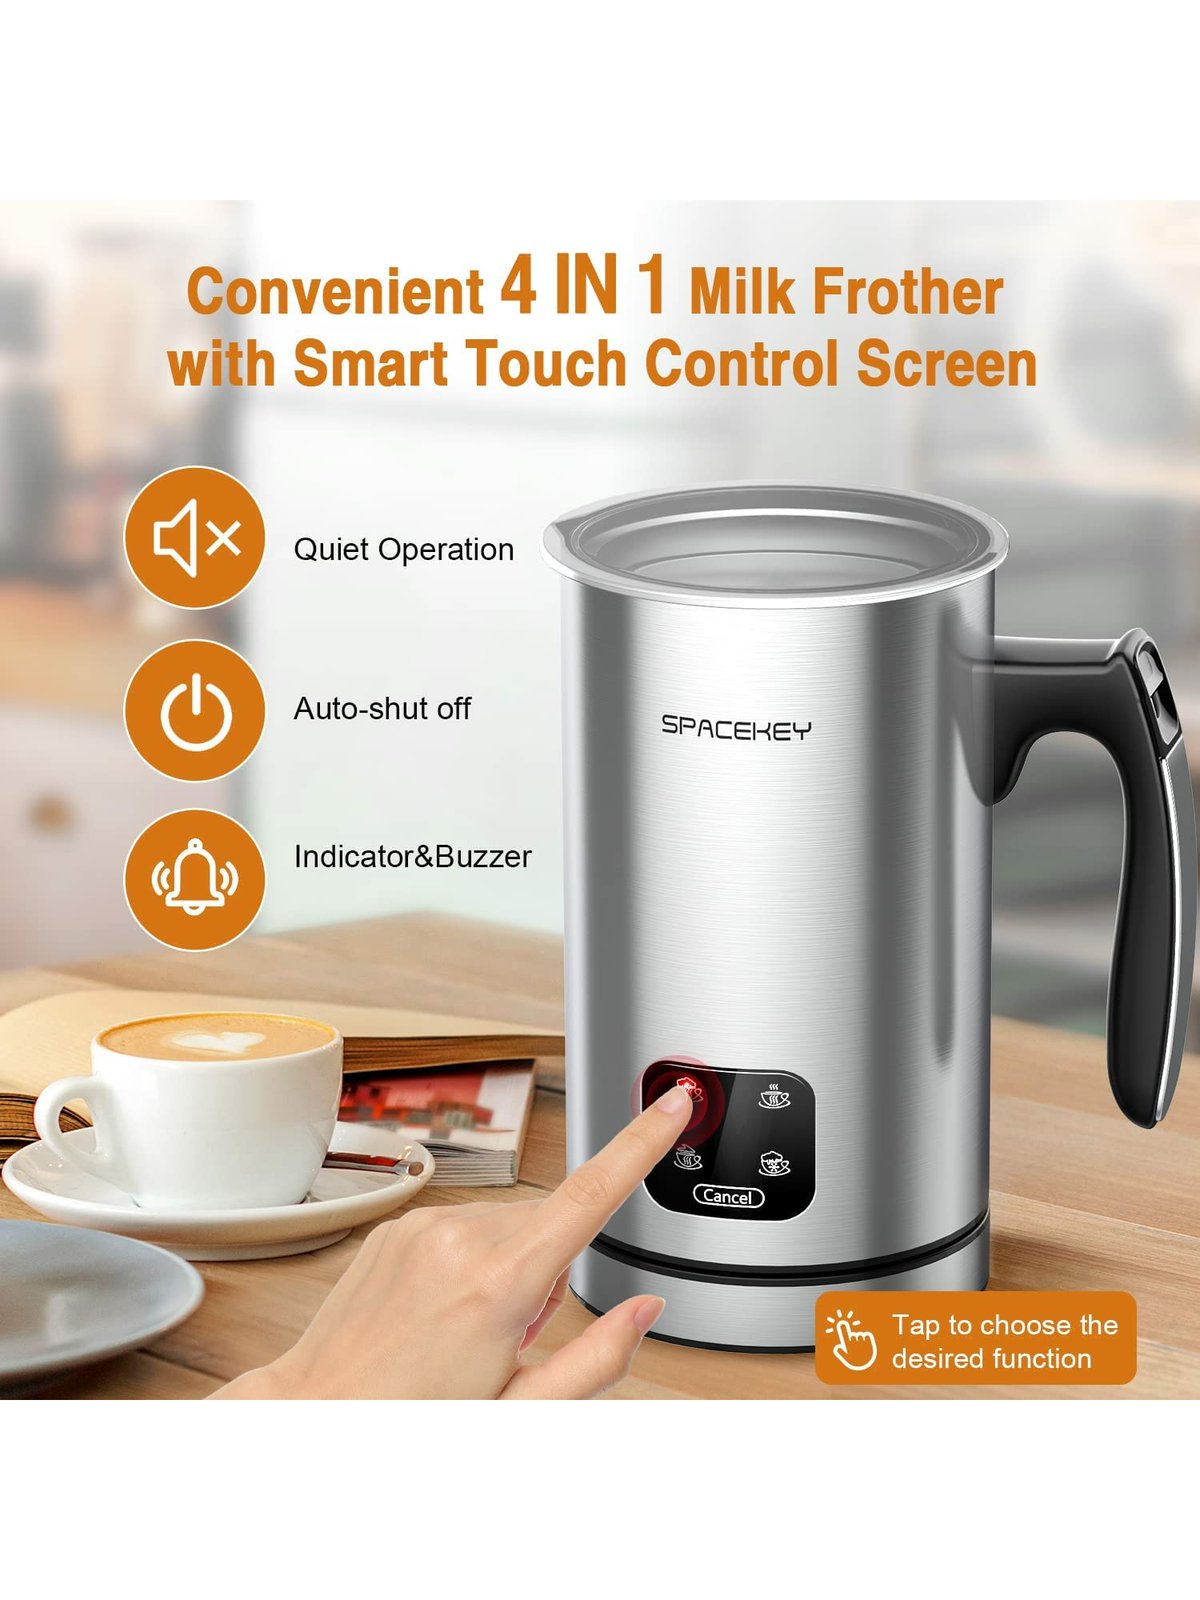 Enjoy the perfect cup of coffee with Milk Frother from Spacekey